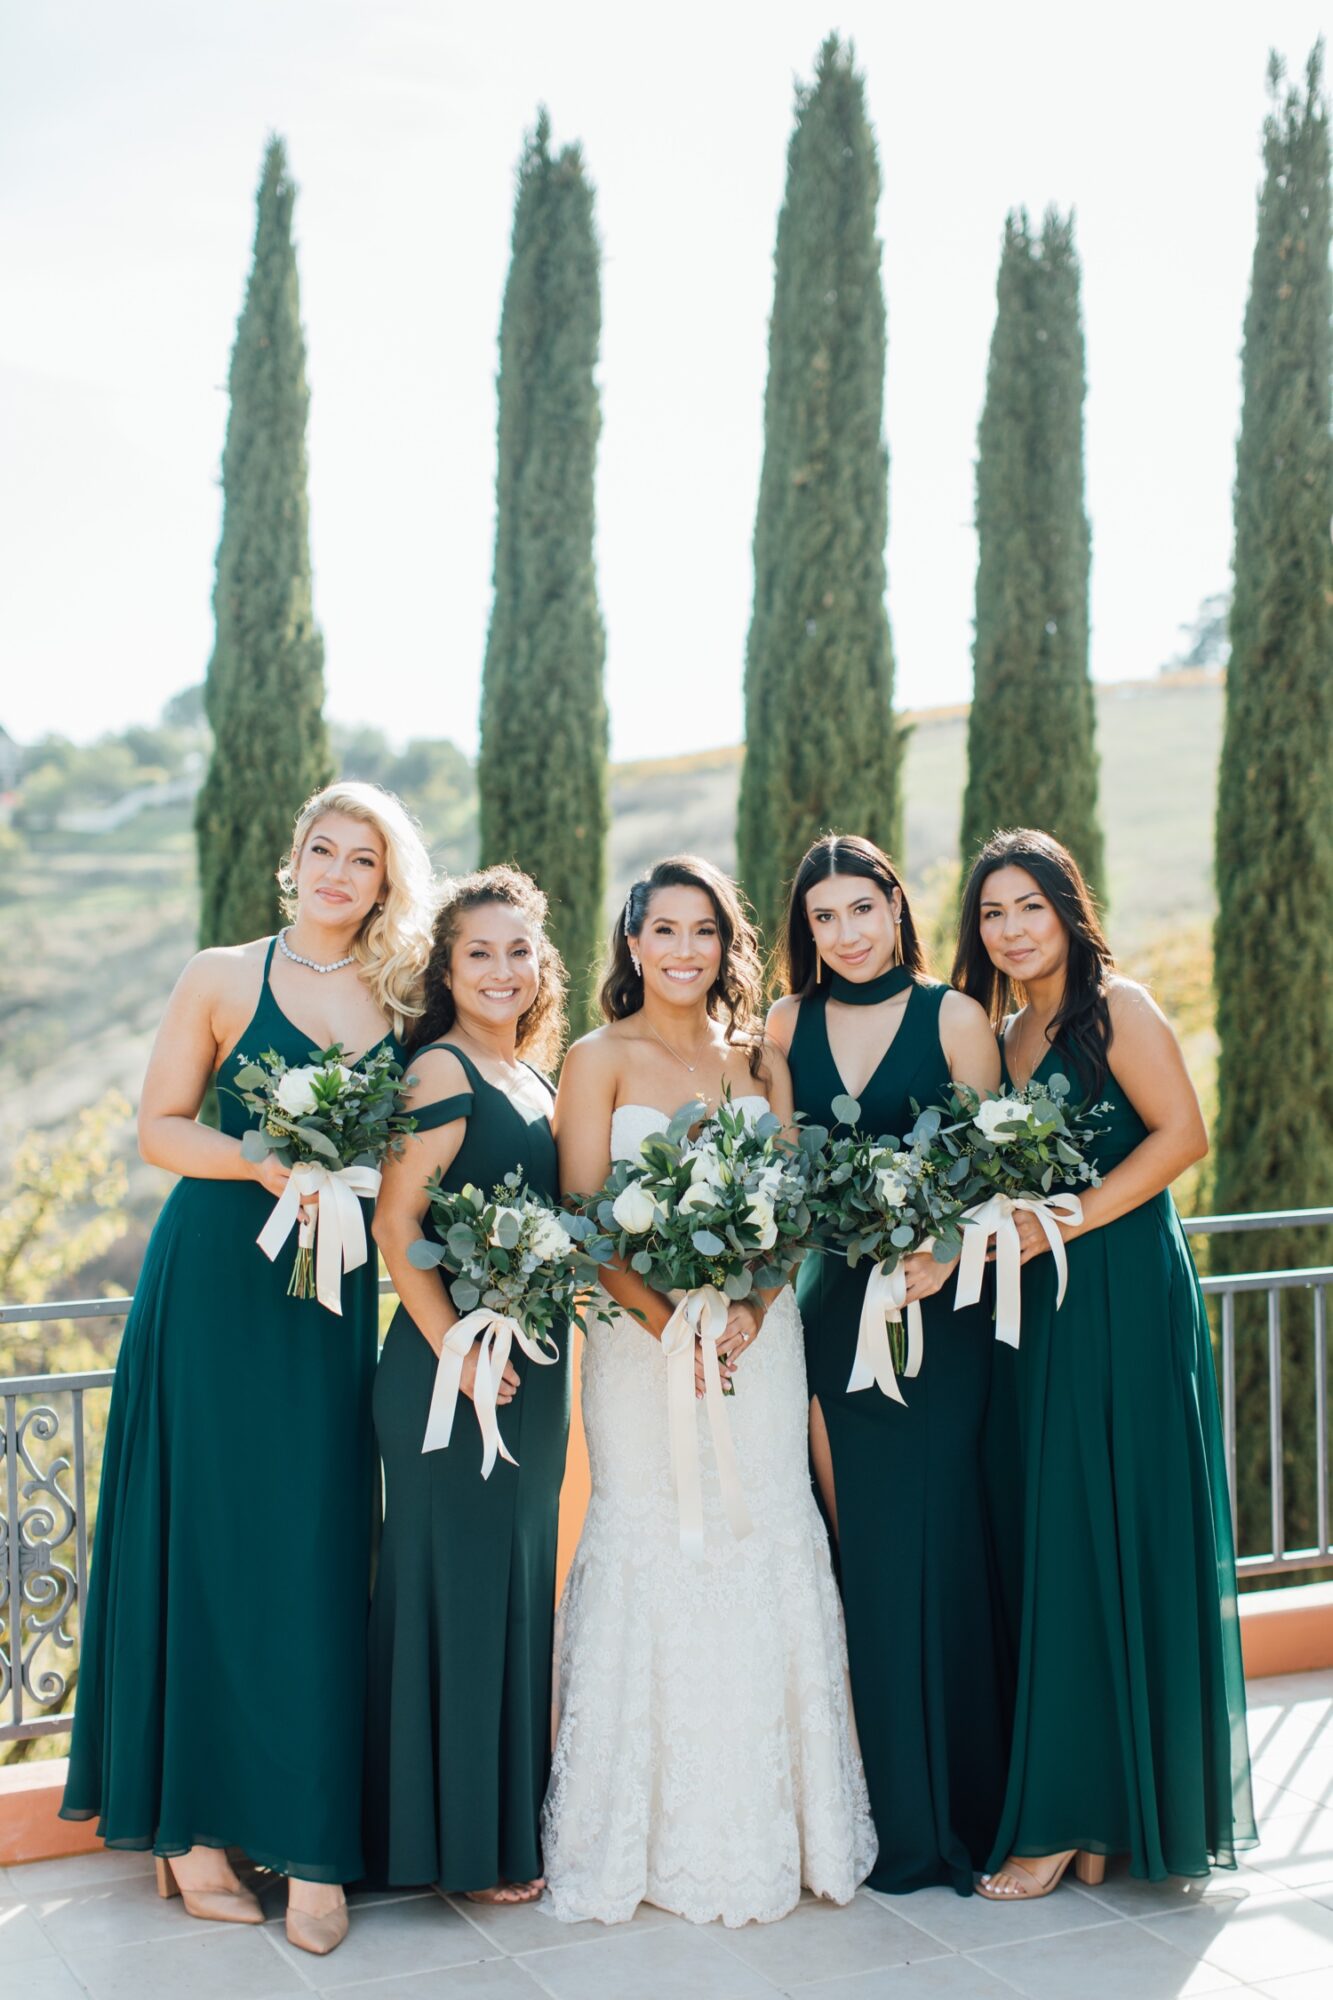 Bride smiling with her bridesmaids